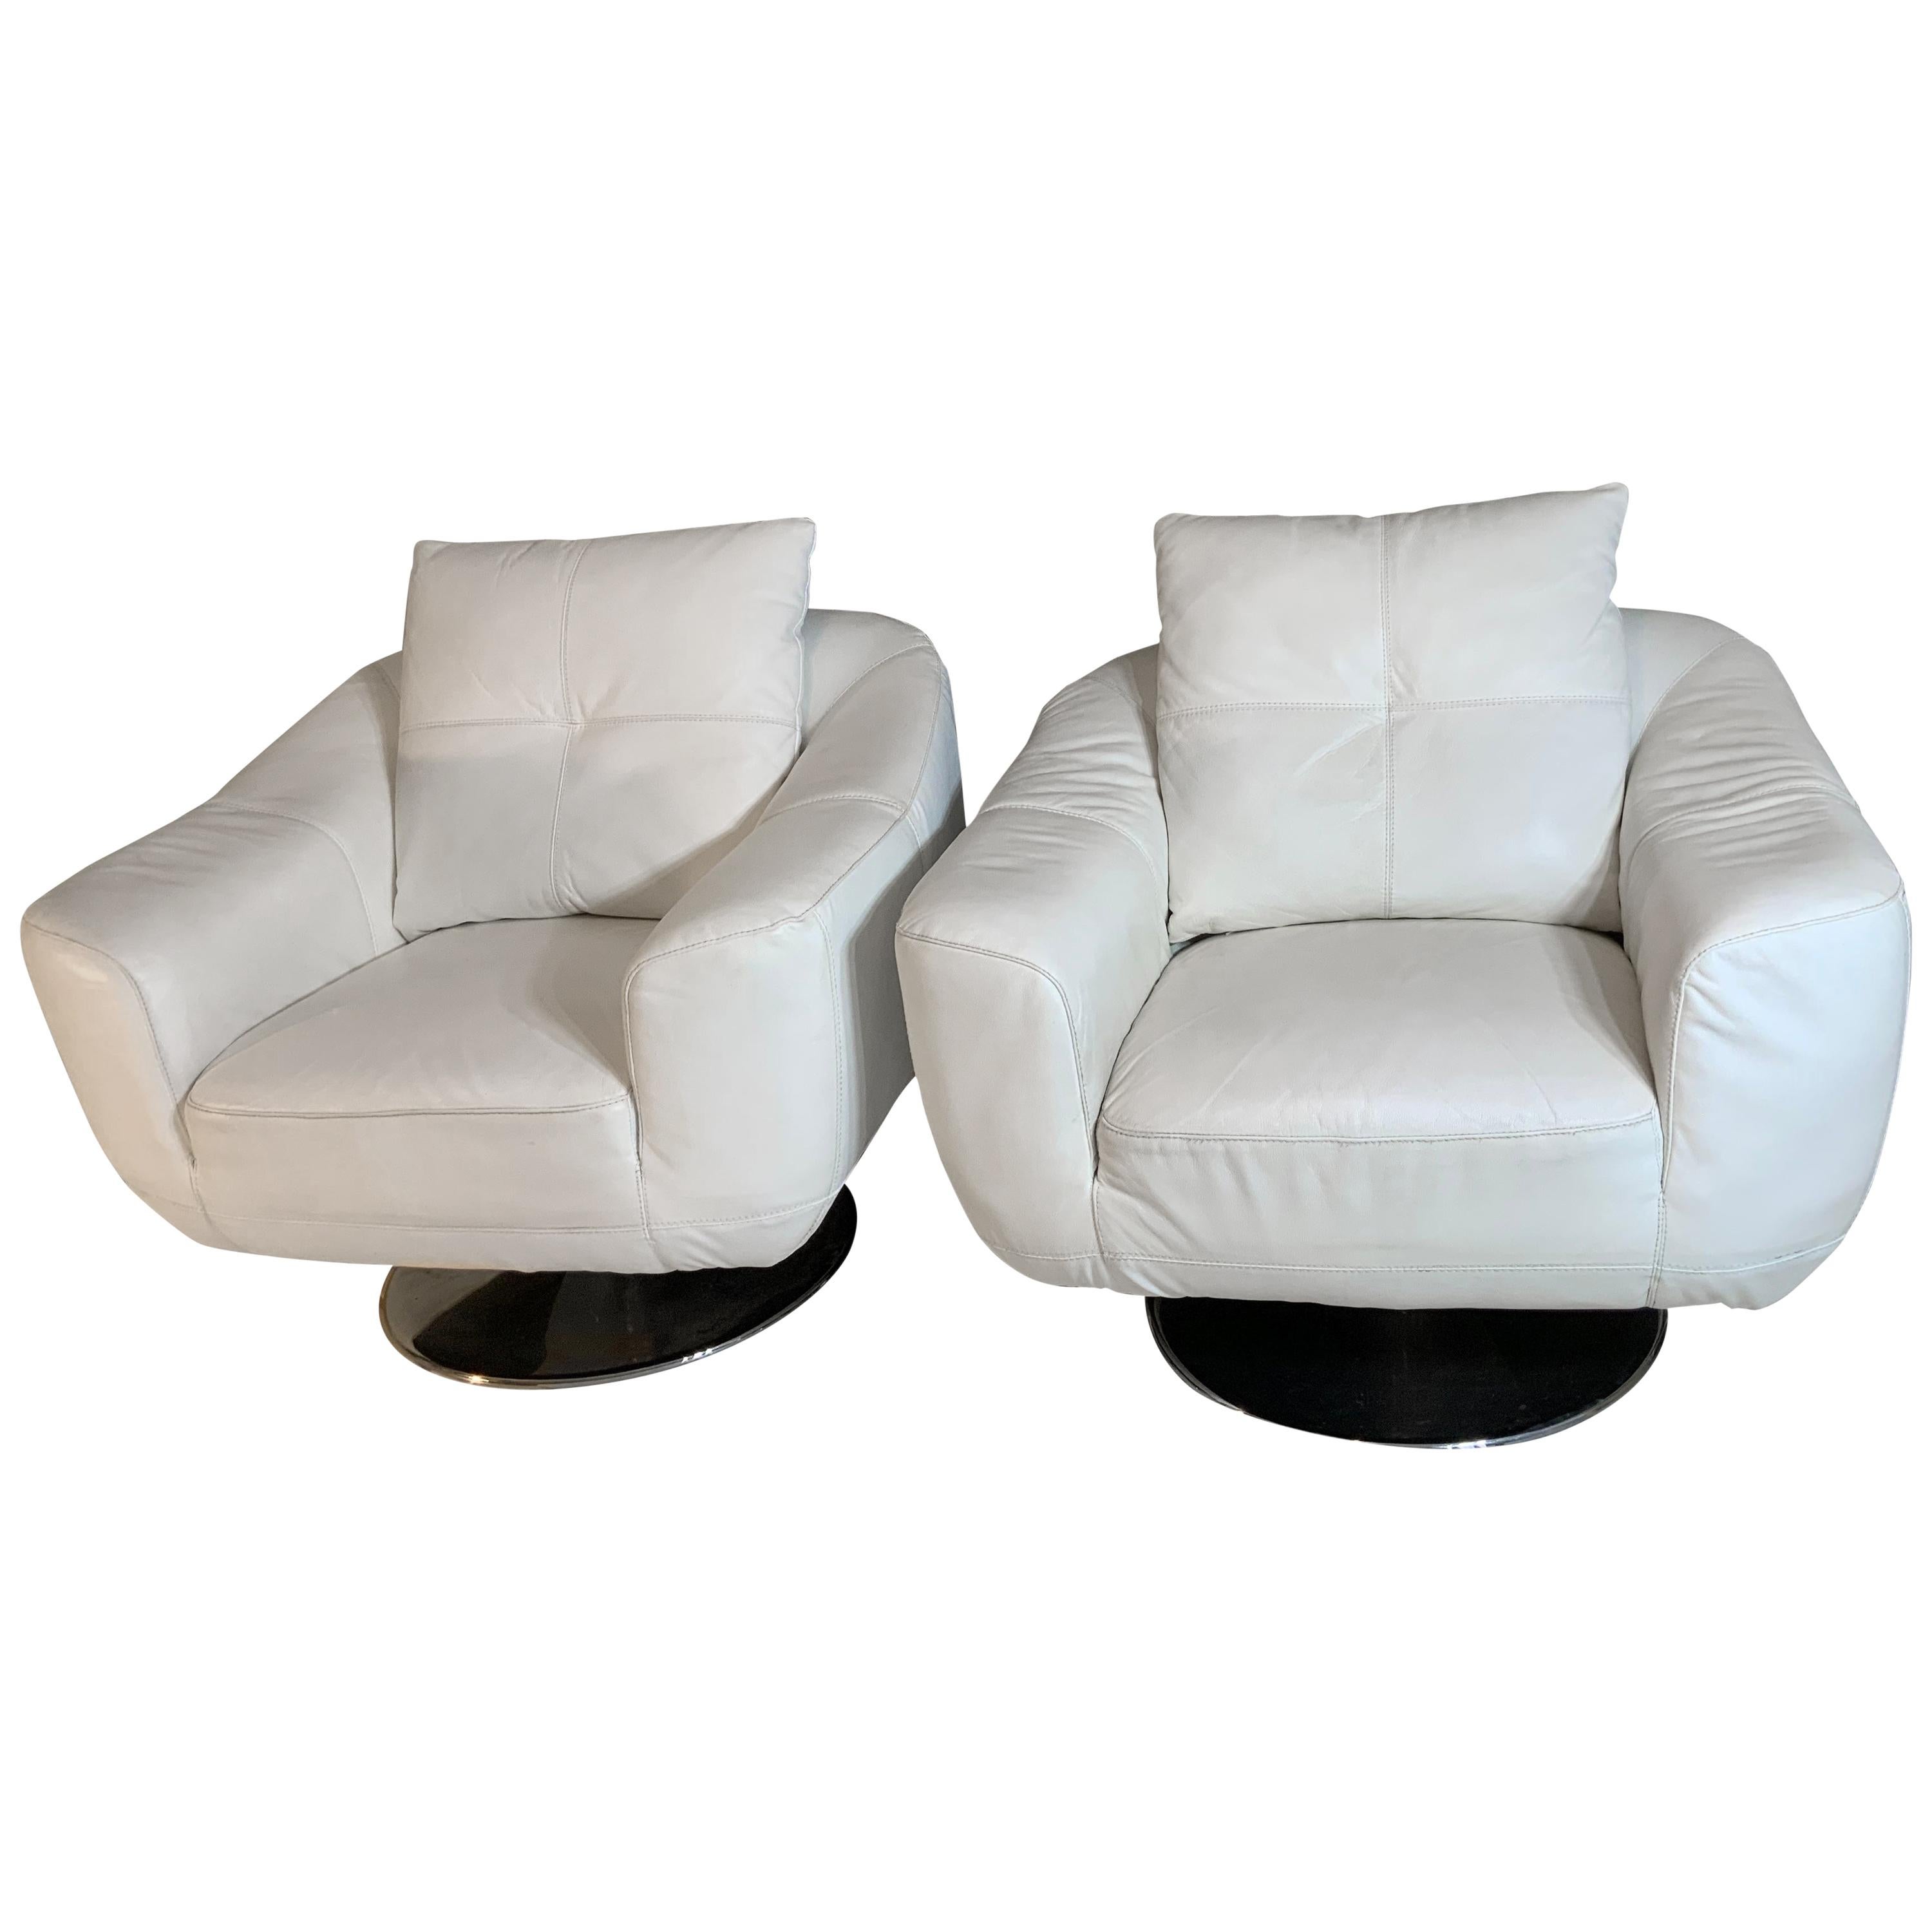 White Faux Leather Swivel Chairs, Faux Leather Swivel Chair Living Room